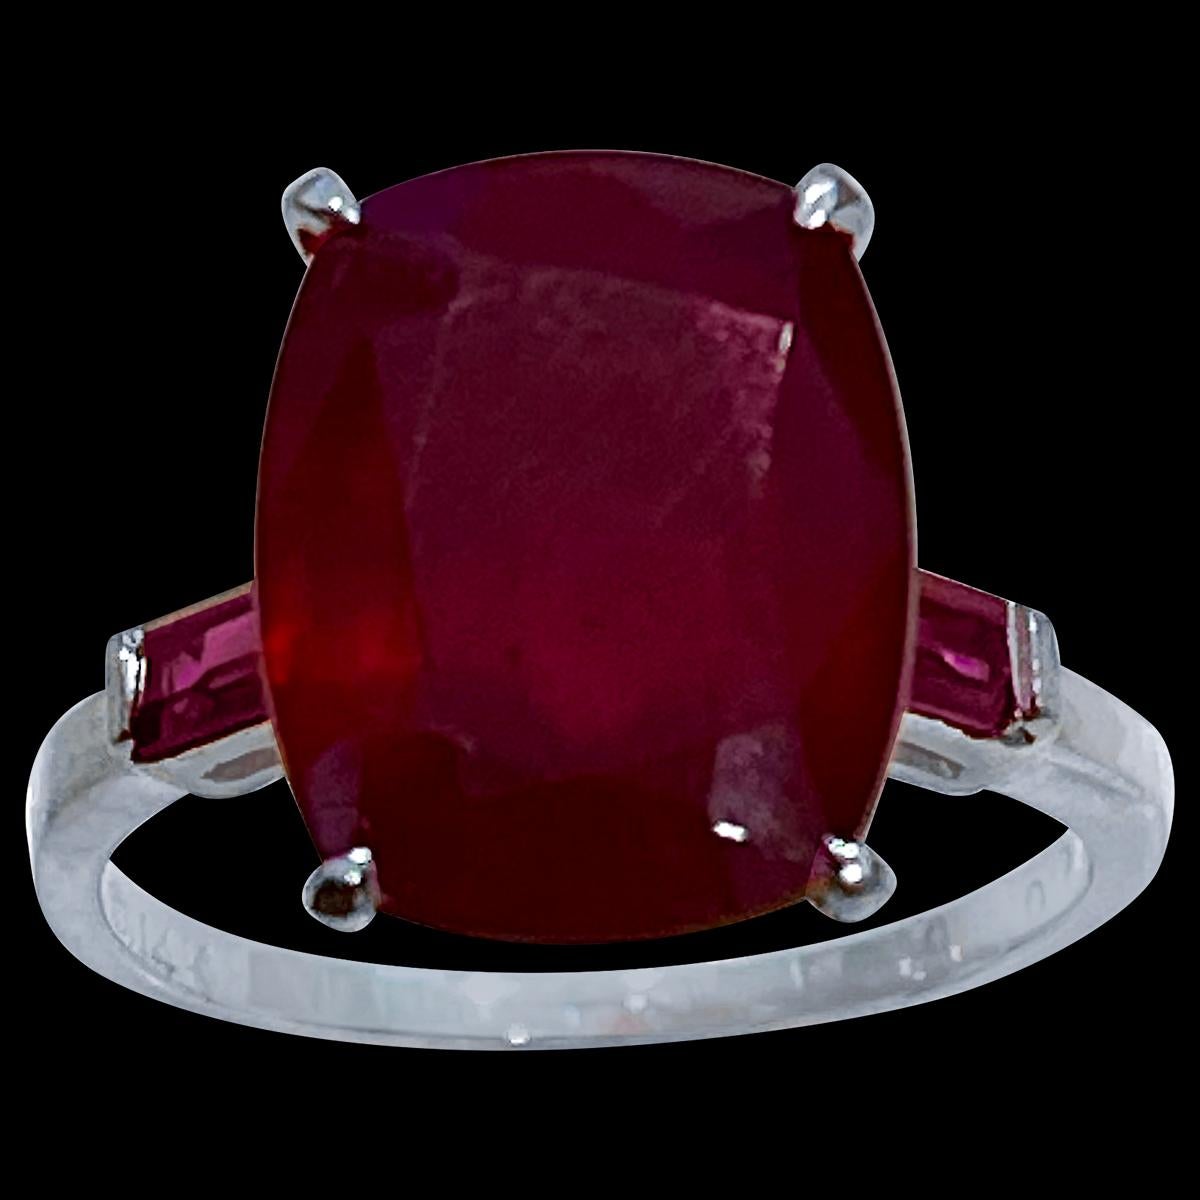 14X10 Cushion Cut   Approximately 8  Carat Treated Ruby  14  Karat White  Gold Ring Size 8
Two ruby Baguettes
Its a treated ruby prong set
14 Karat White  Gold: 5 gram
Ring Size 8  ( can be altered for no charge )
Extremally beautiful and solidly